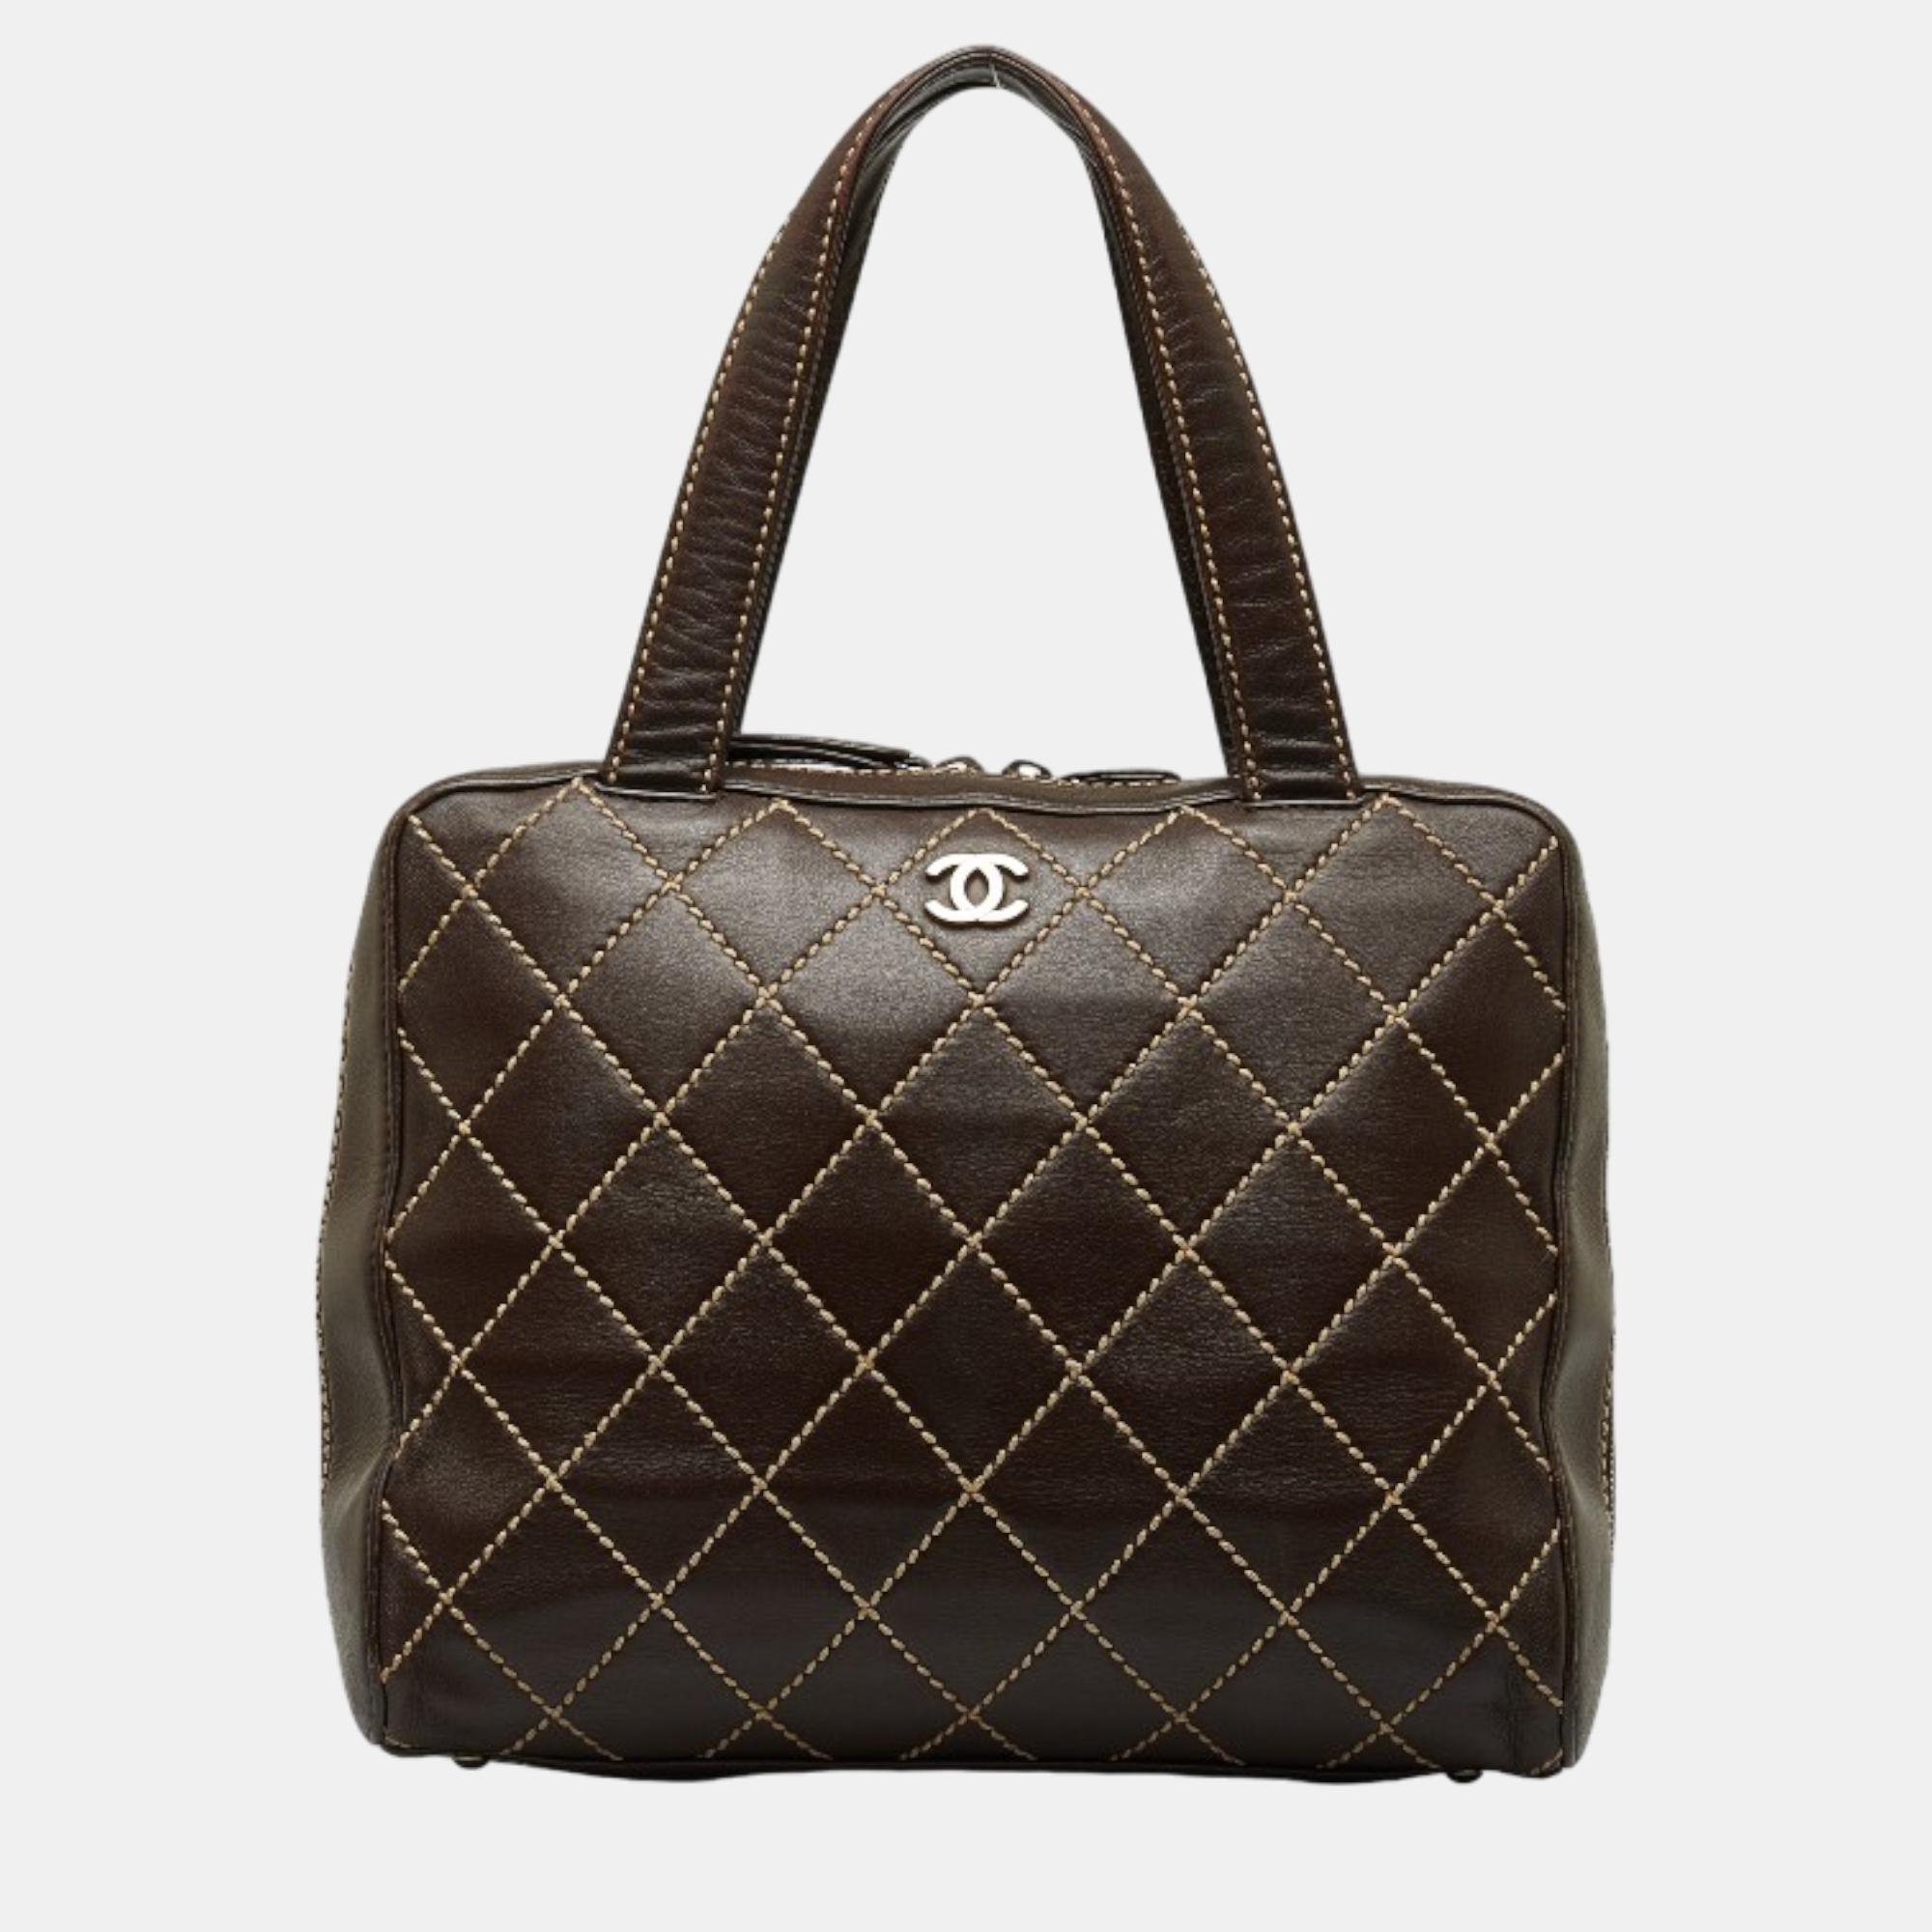 Pre-owned Chanel Brown Leather Wild Stitch Boston Bag